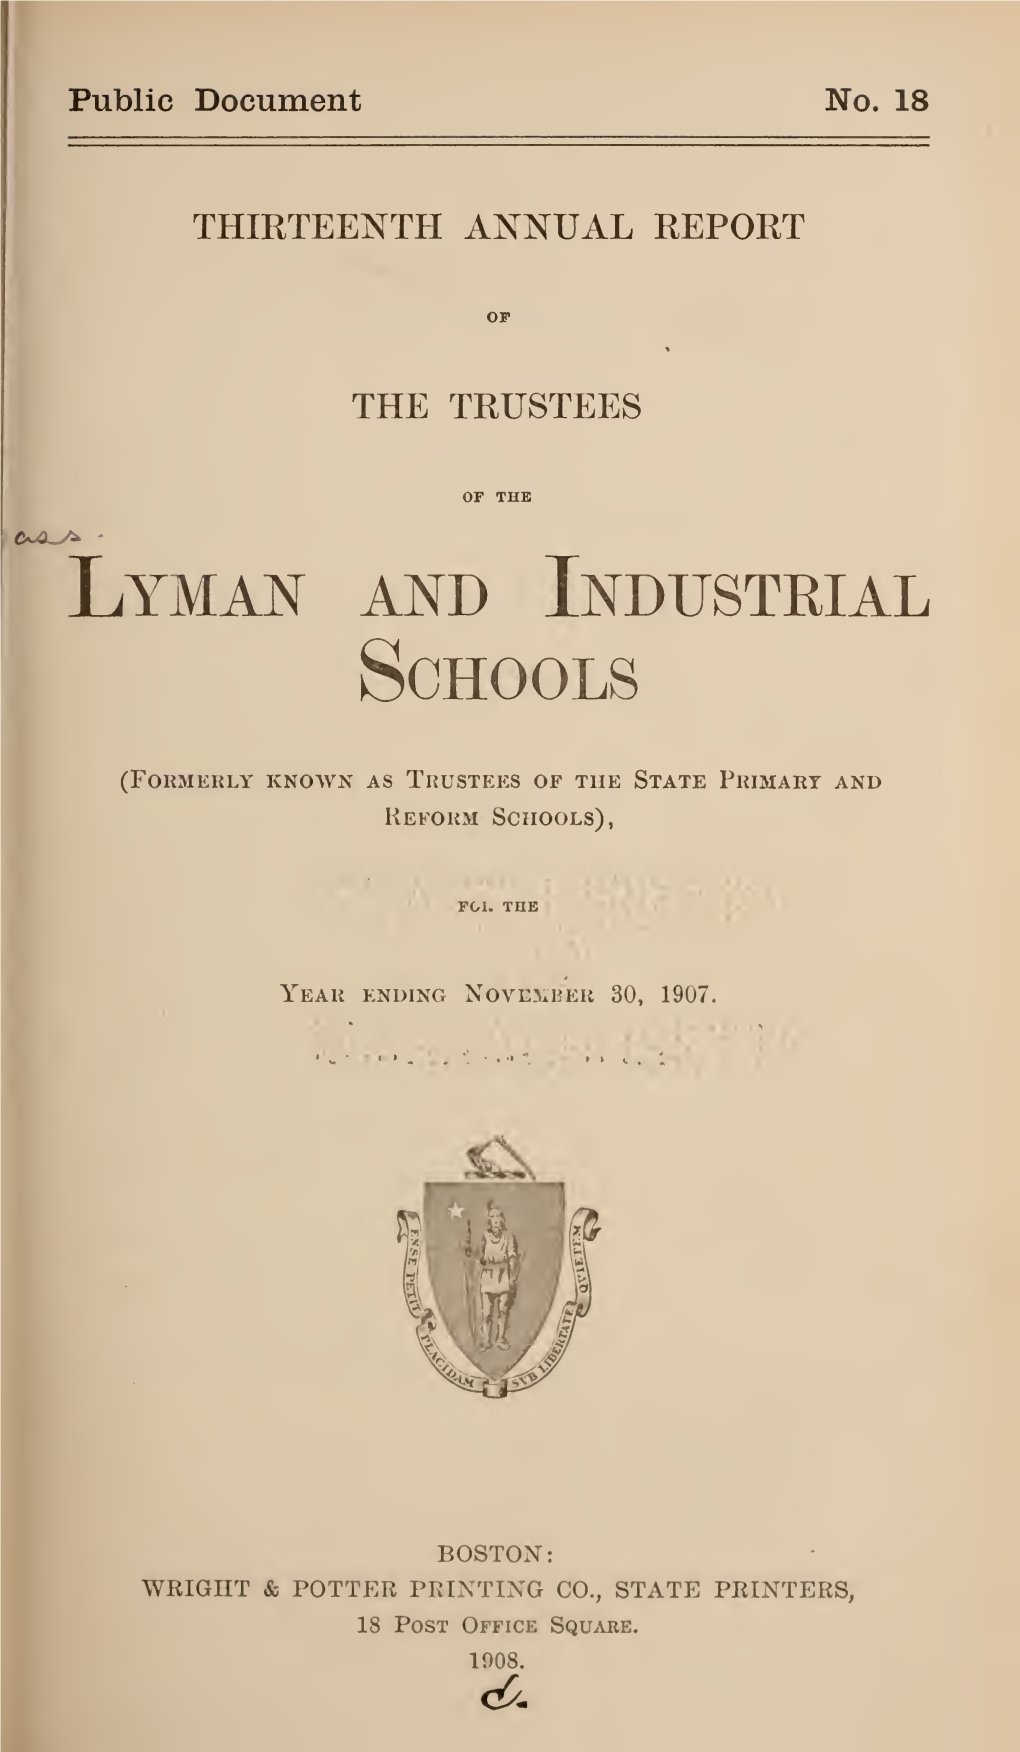 9Th to 16Th Annual Report of the Lyman and Industrial Schools